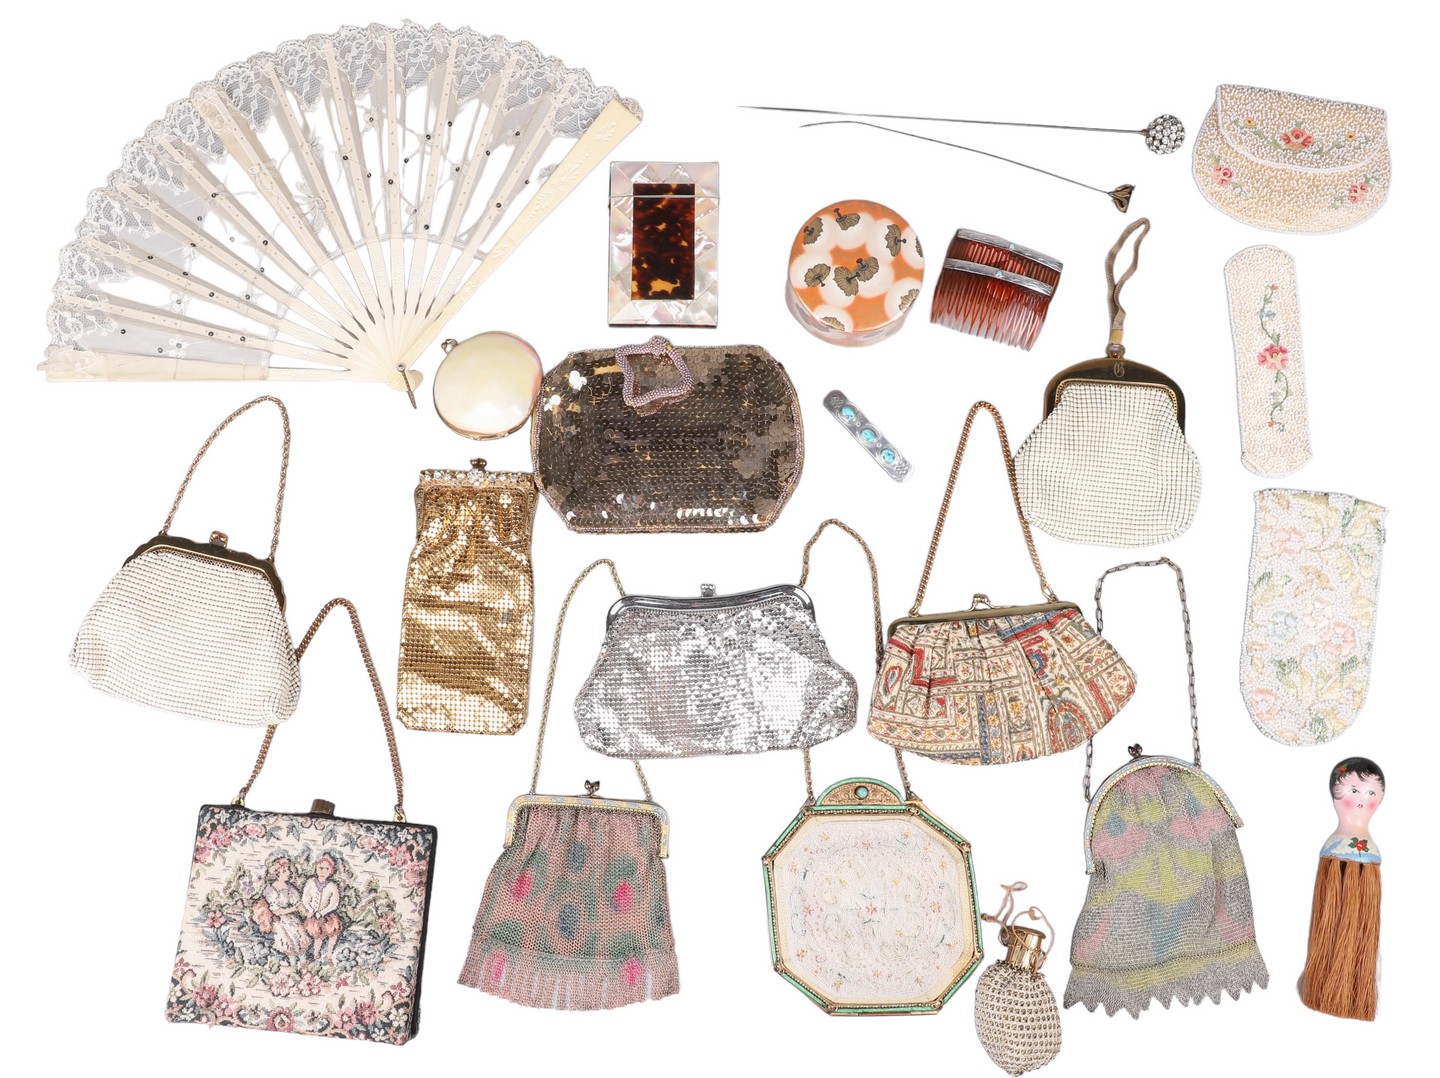 Vintage purse and vanity item grouping 2e0718